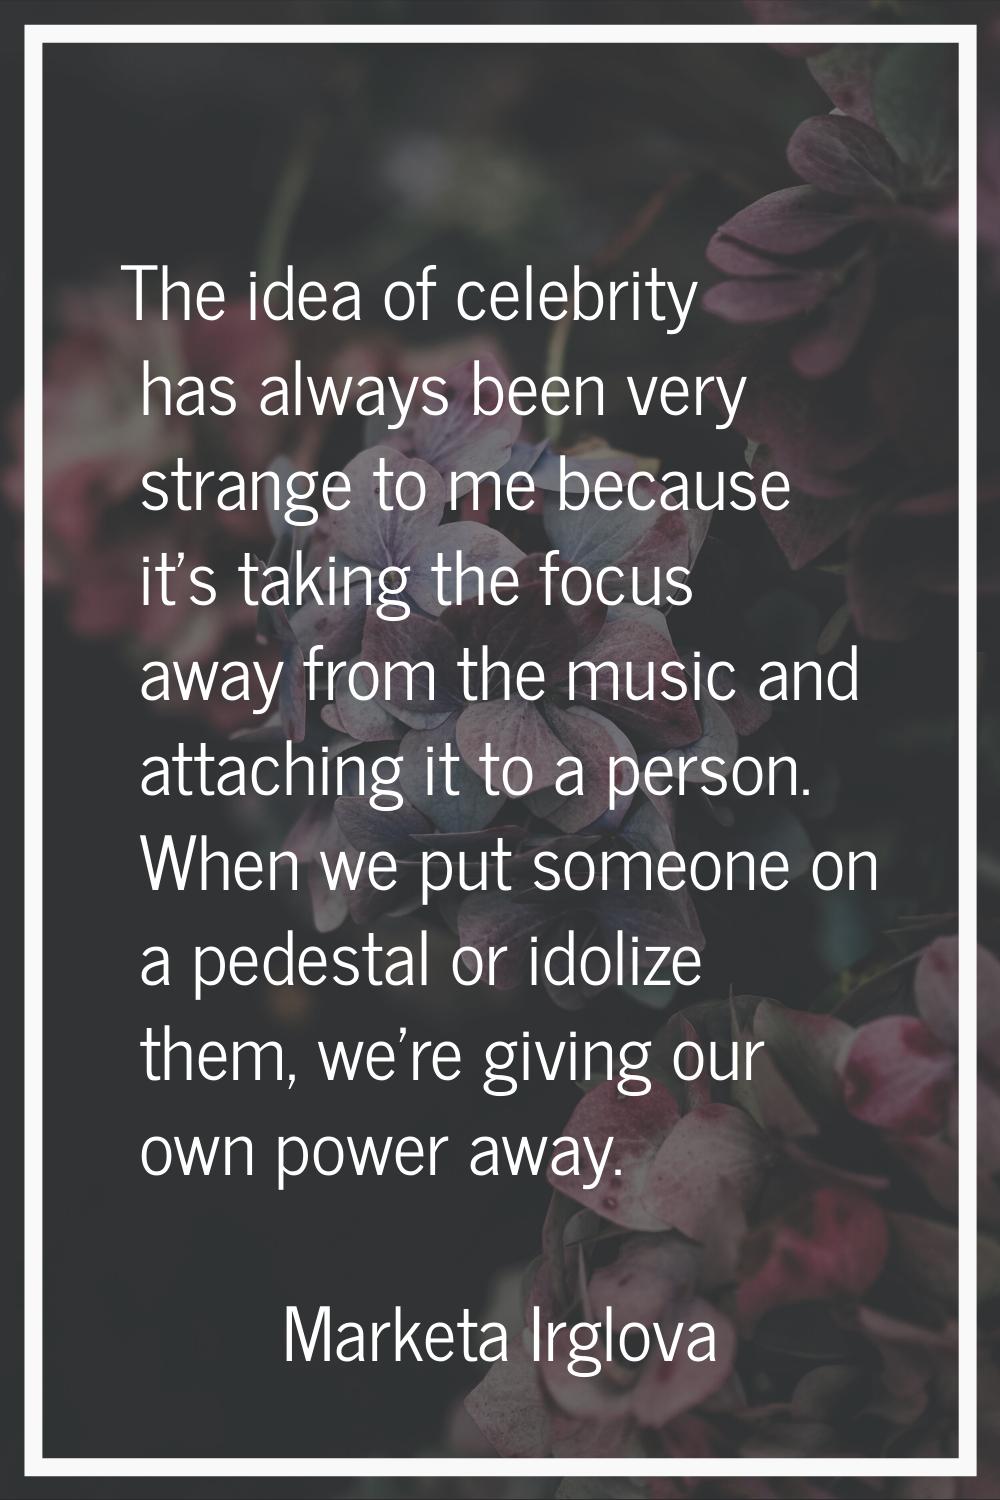 The idea of celebrity has always been very strange to me because it's taking the focus away from th